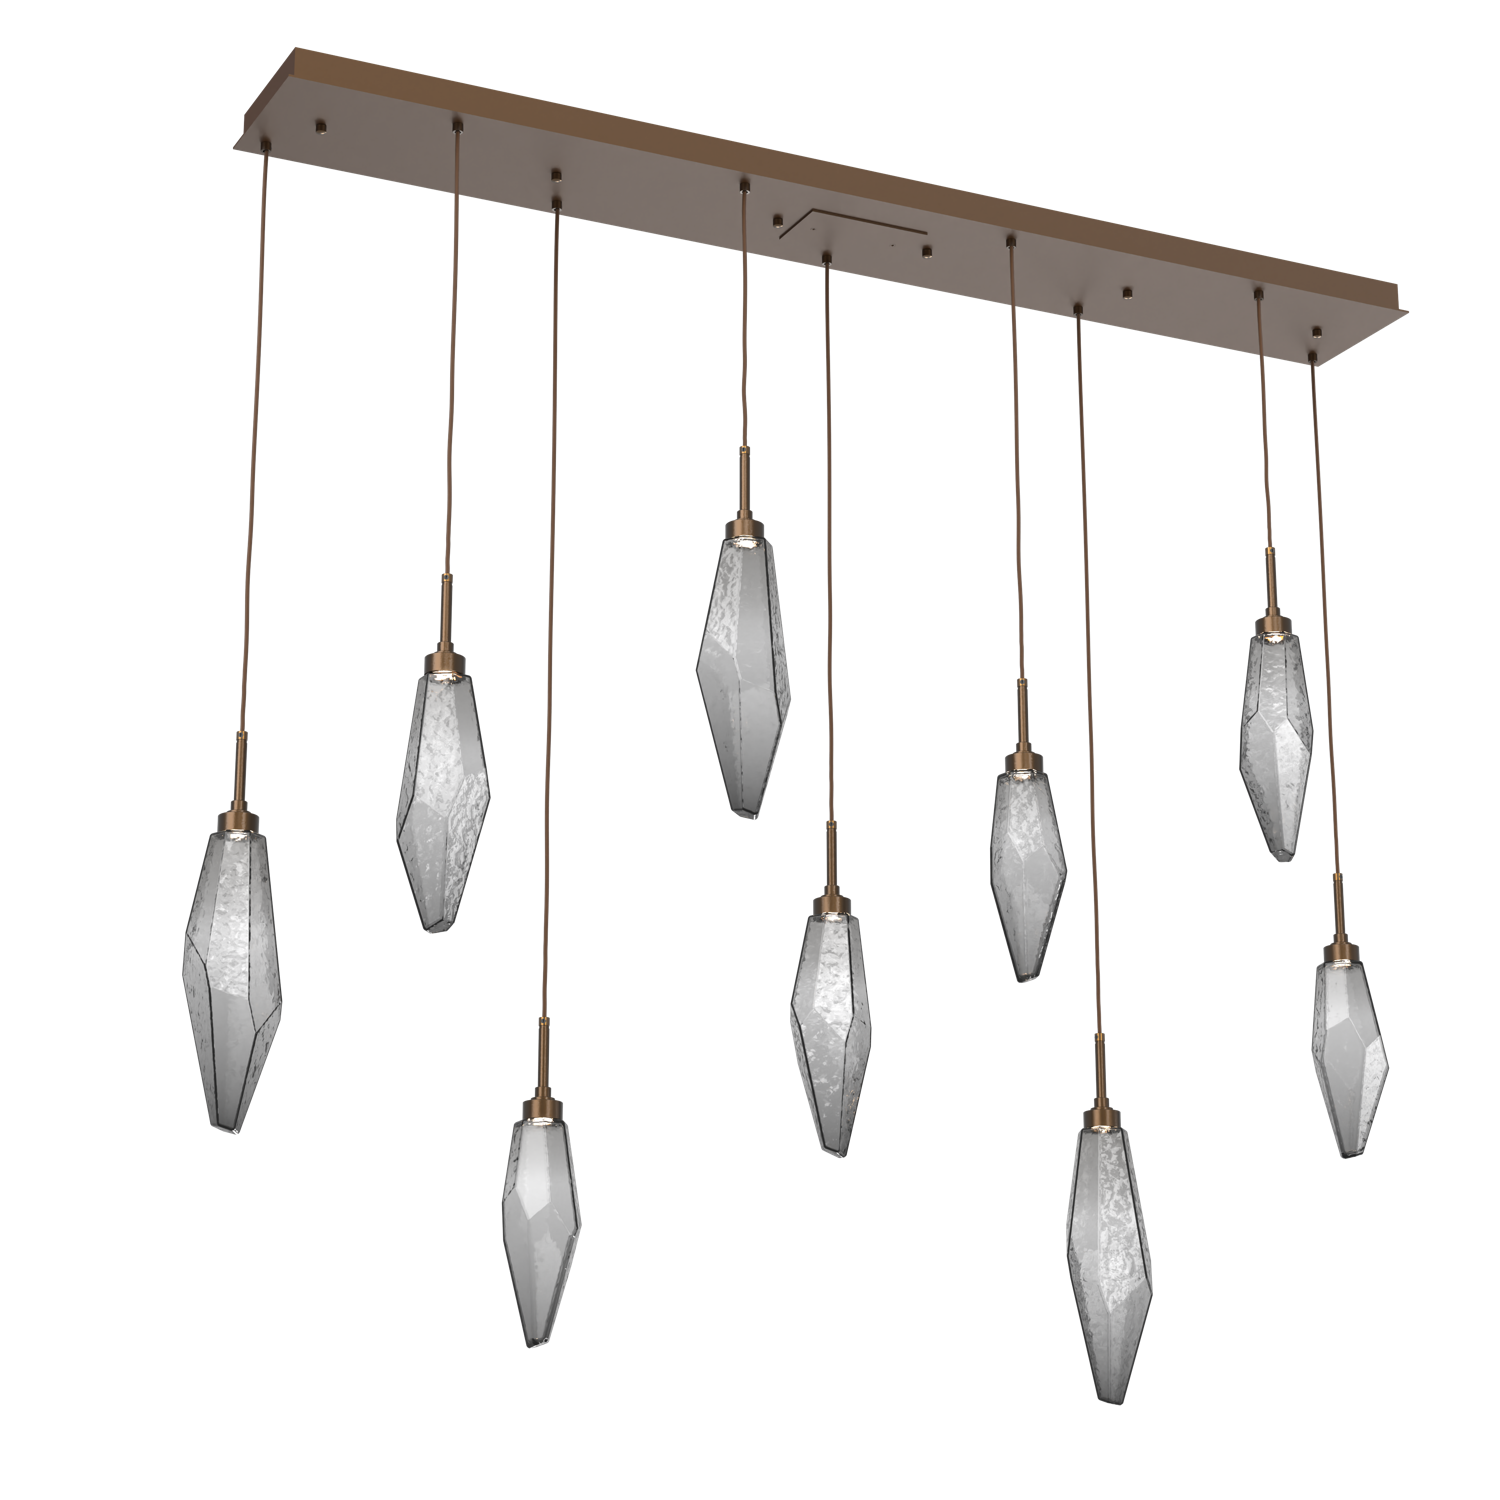 PLB0050-09-FB-CS-Hammerton-Studio-Rock-Crystal-9-light-linear-pendant-chandelier-with-flat-bronze-finish-and-chilled-smoke-glass-shades-and-LED-lamping